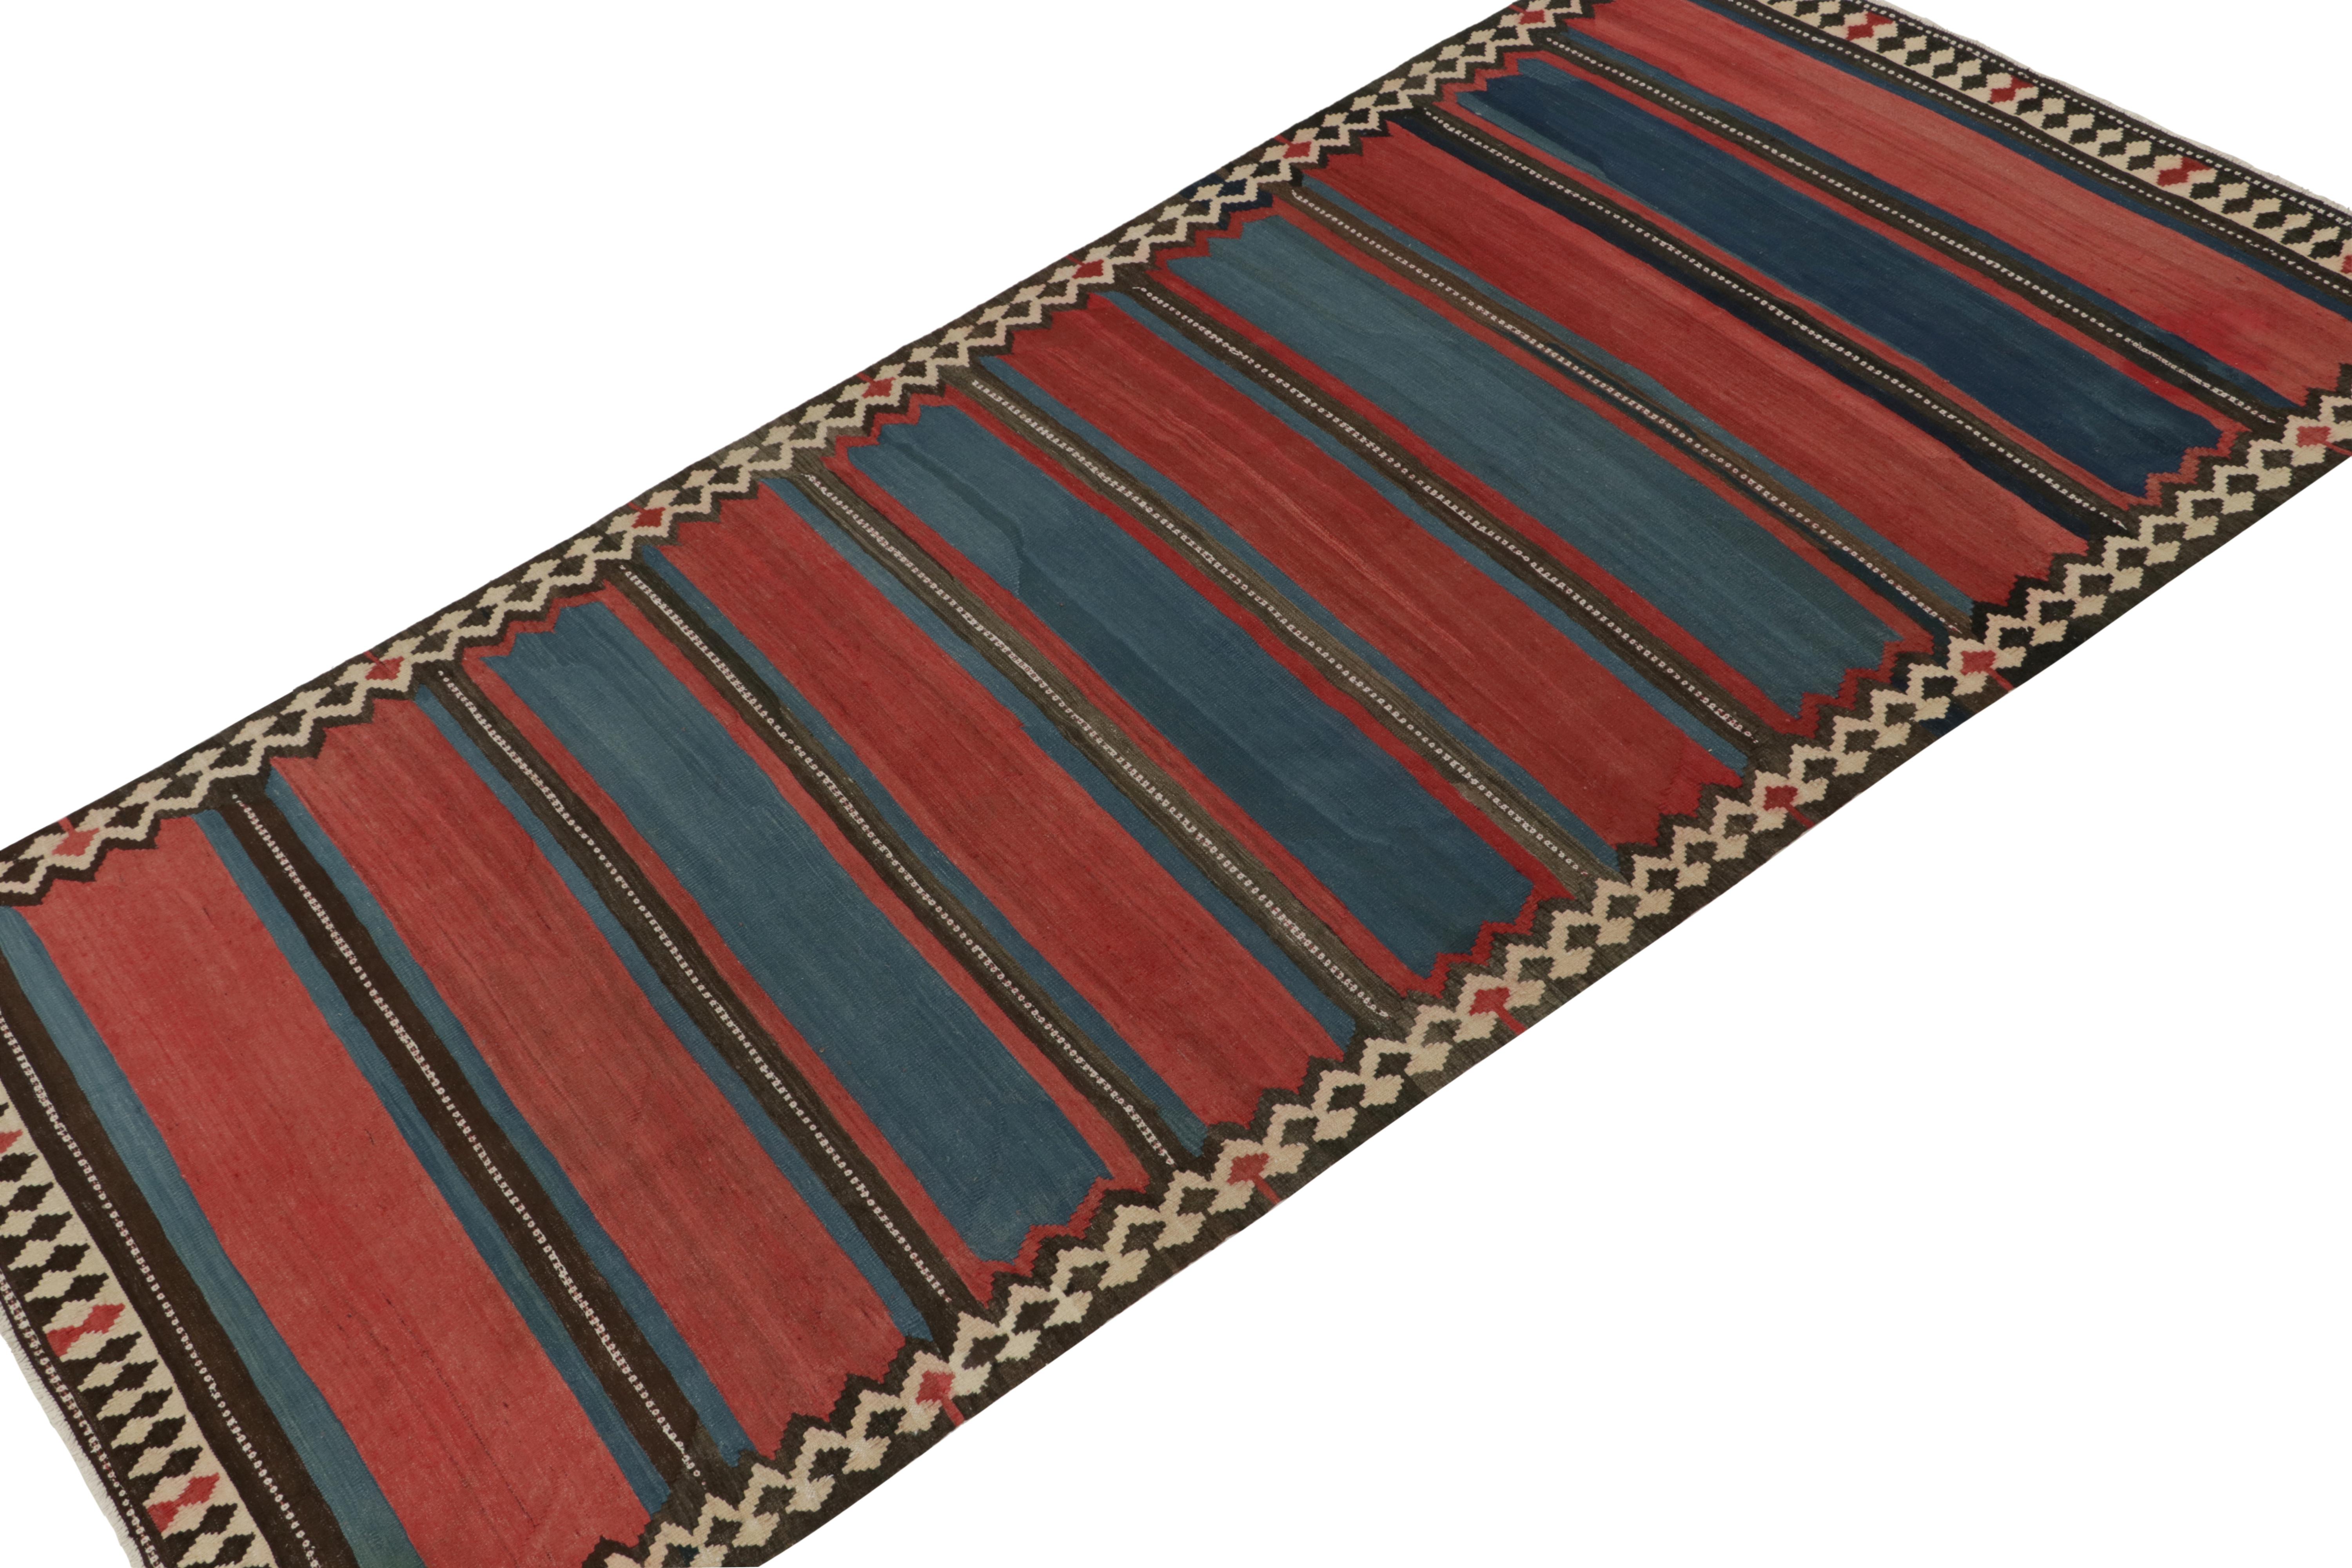 This vintage 6x12 Persian kilim is a tribal rug of Shahsavan provenance. Handwoven in wool, it originates circa 1950-1960.

Further on the Design:

This tribal Kilim favors stripes in brick red and dark blue stripes with beige and brown in the